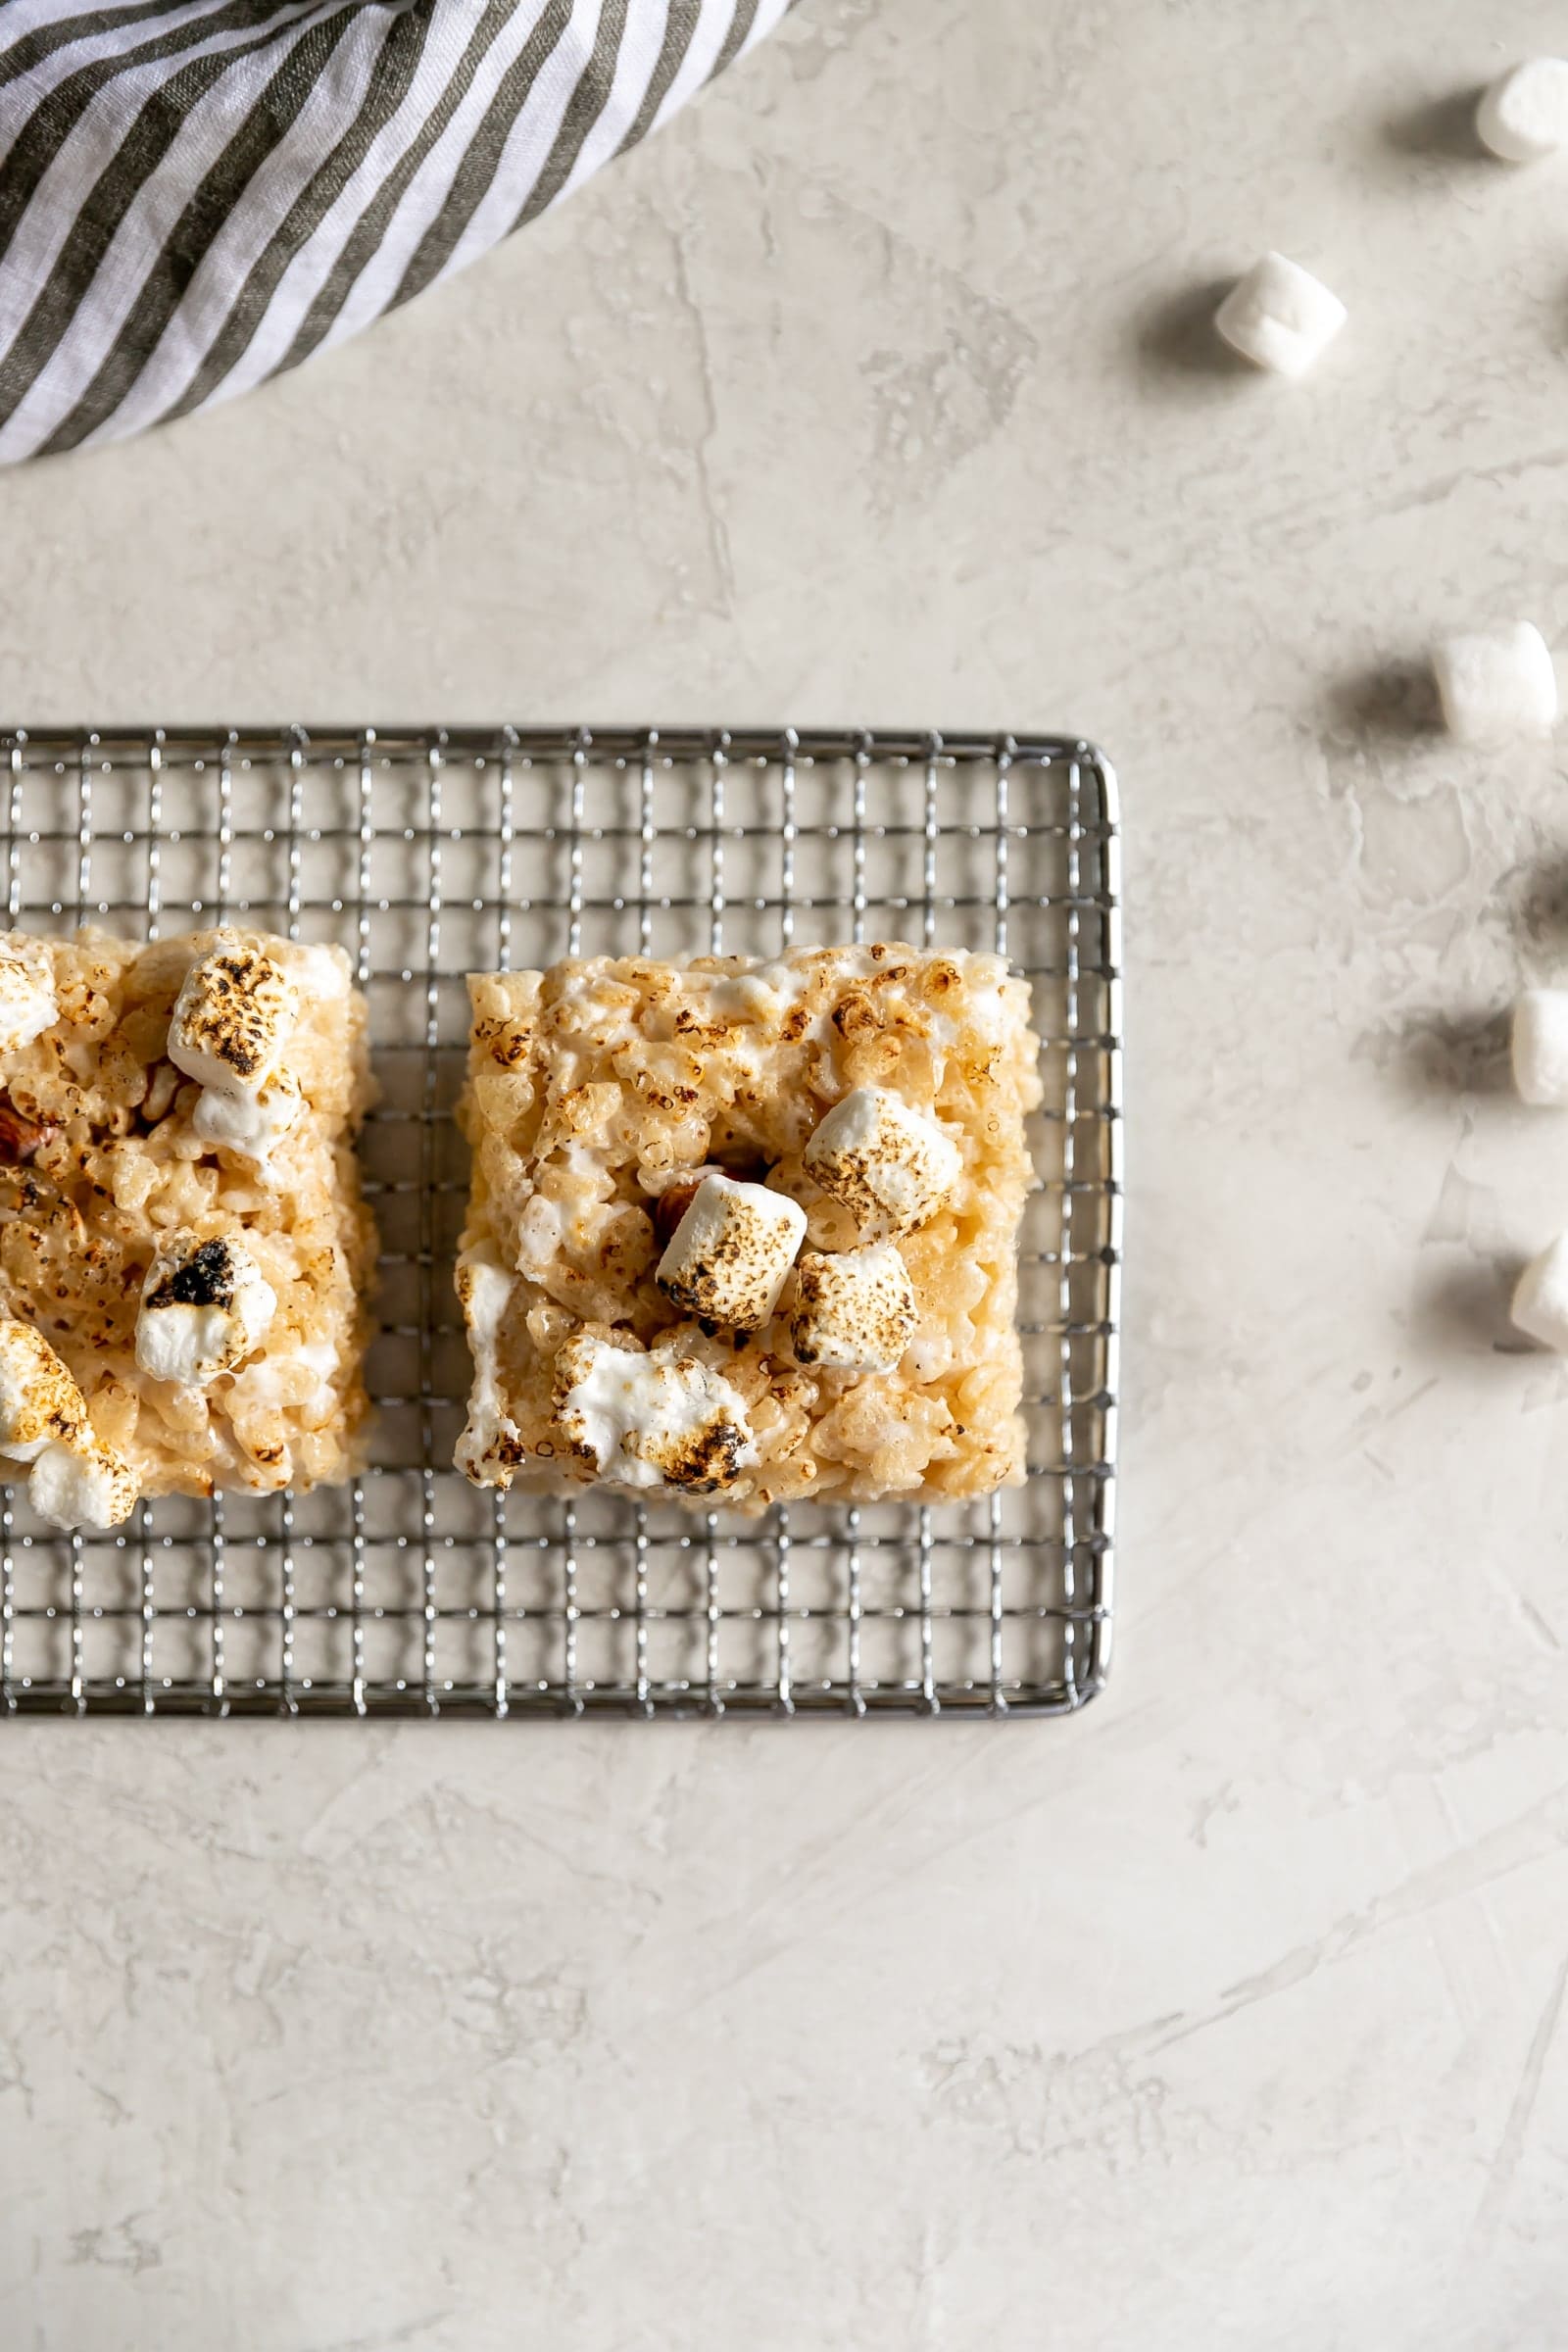 A sweet crispy classic treat with a smoky twist! Rice cereal, torched marshmallows, and smoked almonds come together to make Smoky Rice Krispie Treats.